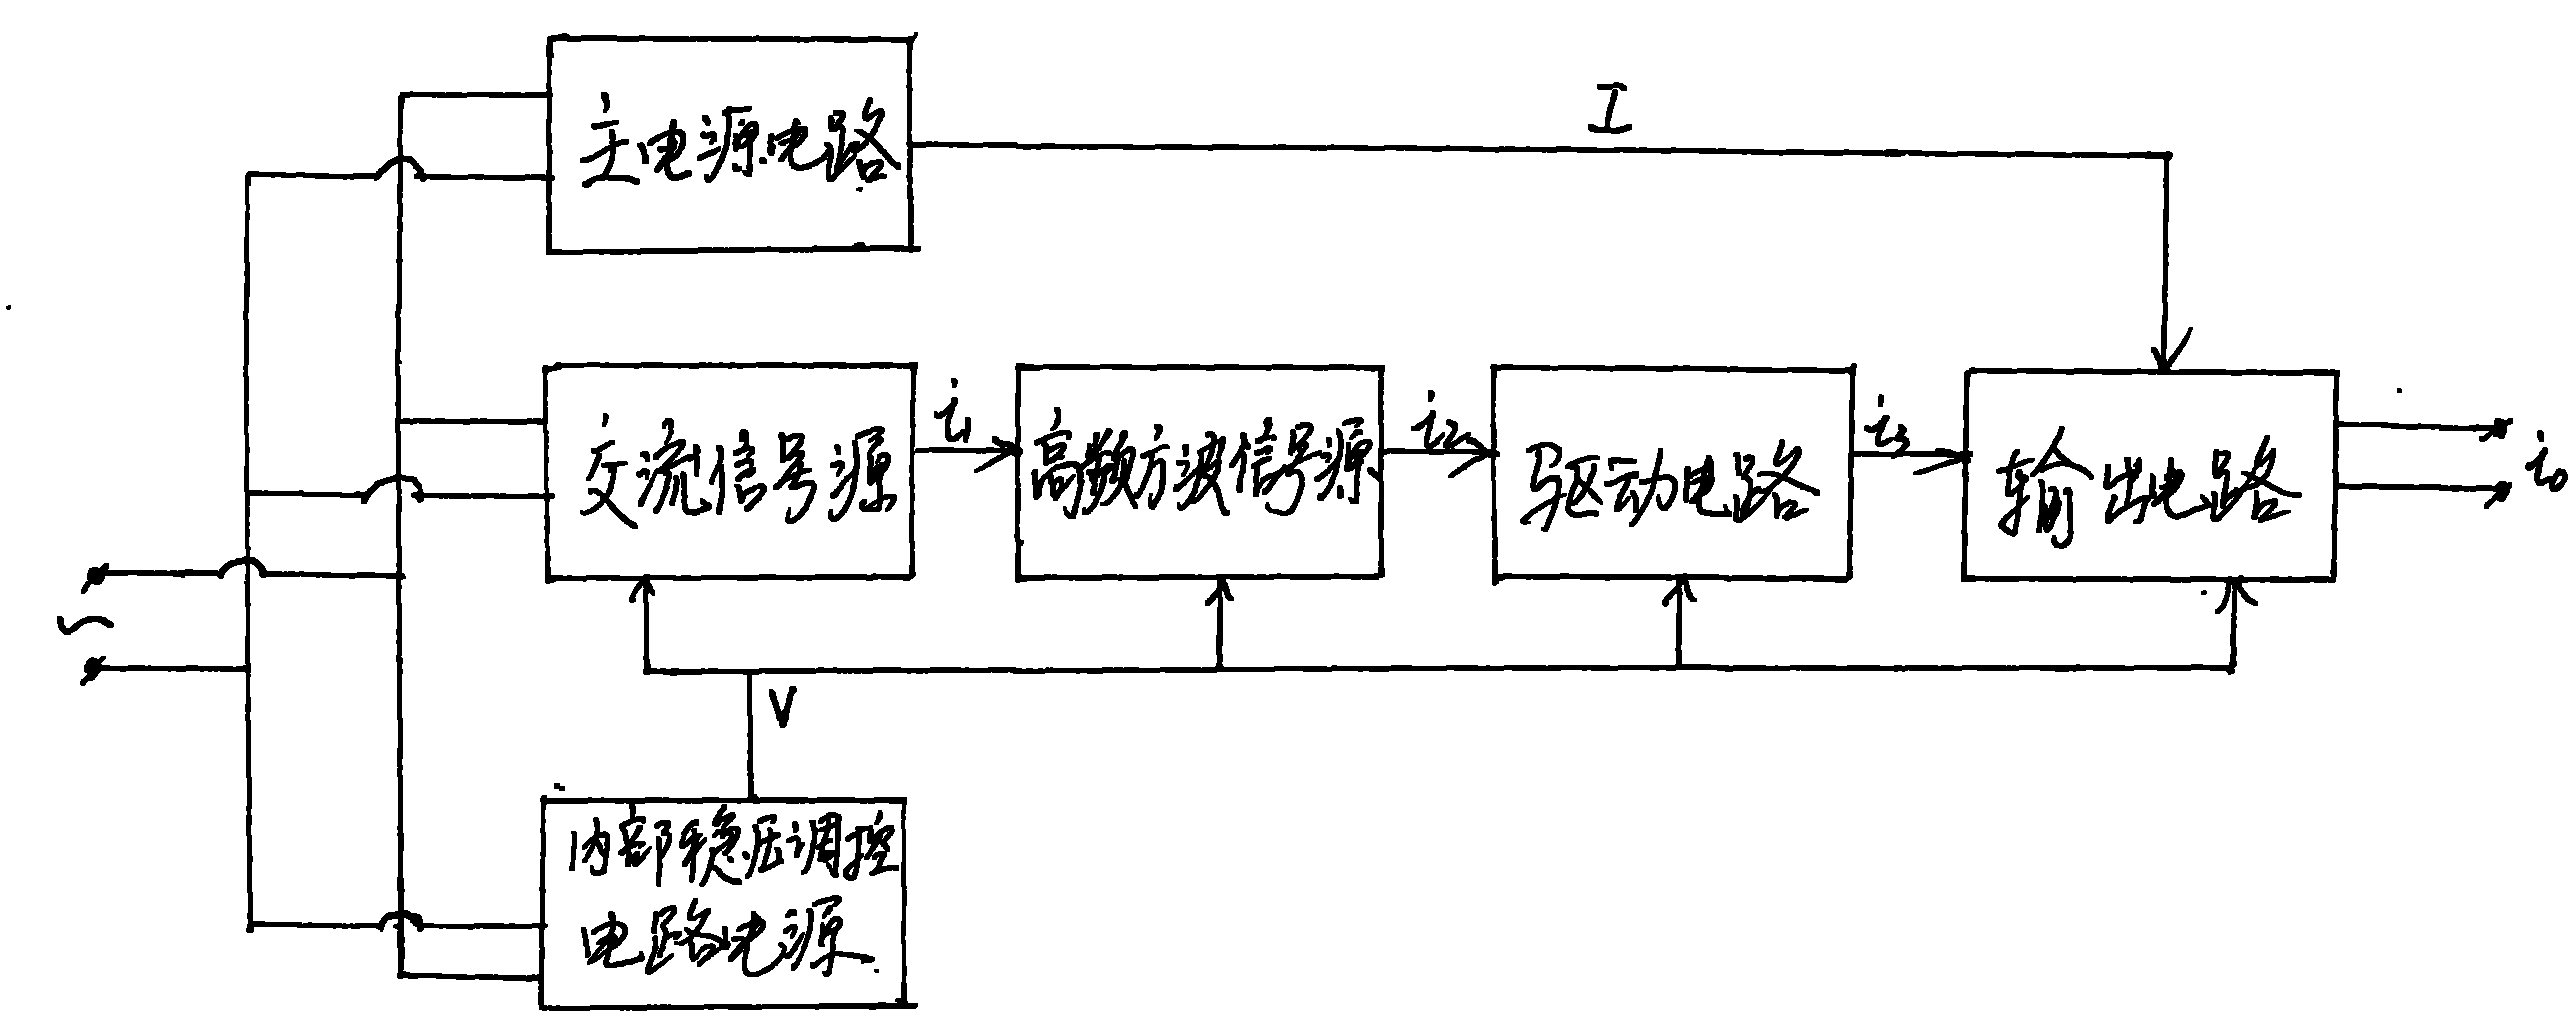 Electric power unit for electrochemical method water treatment system